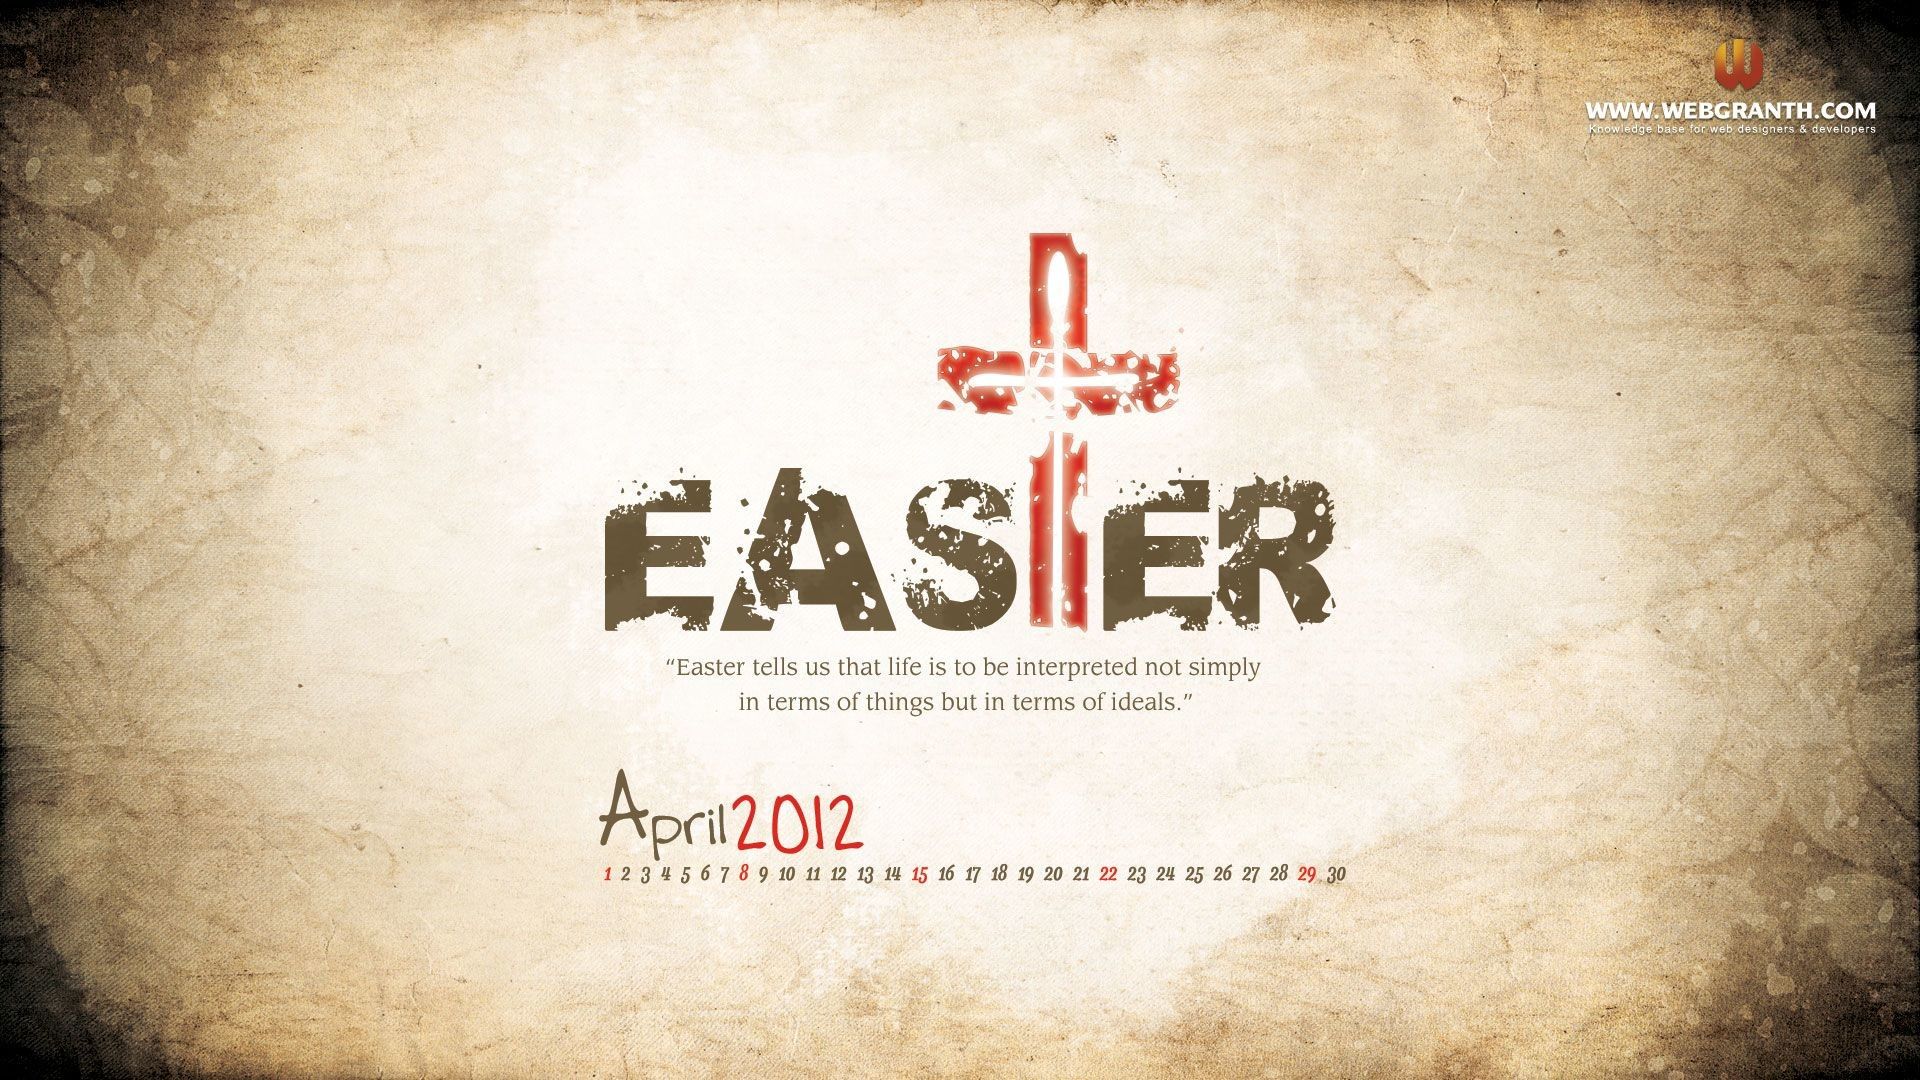 Christian Easter Wallpaper background picture